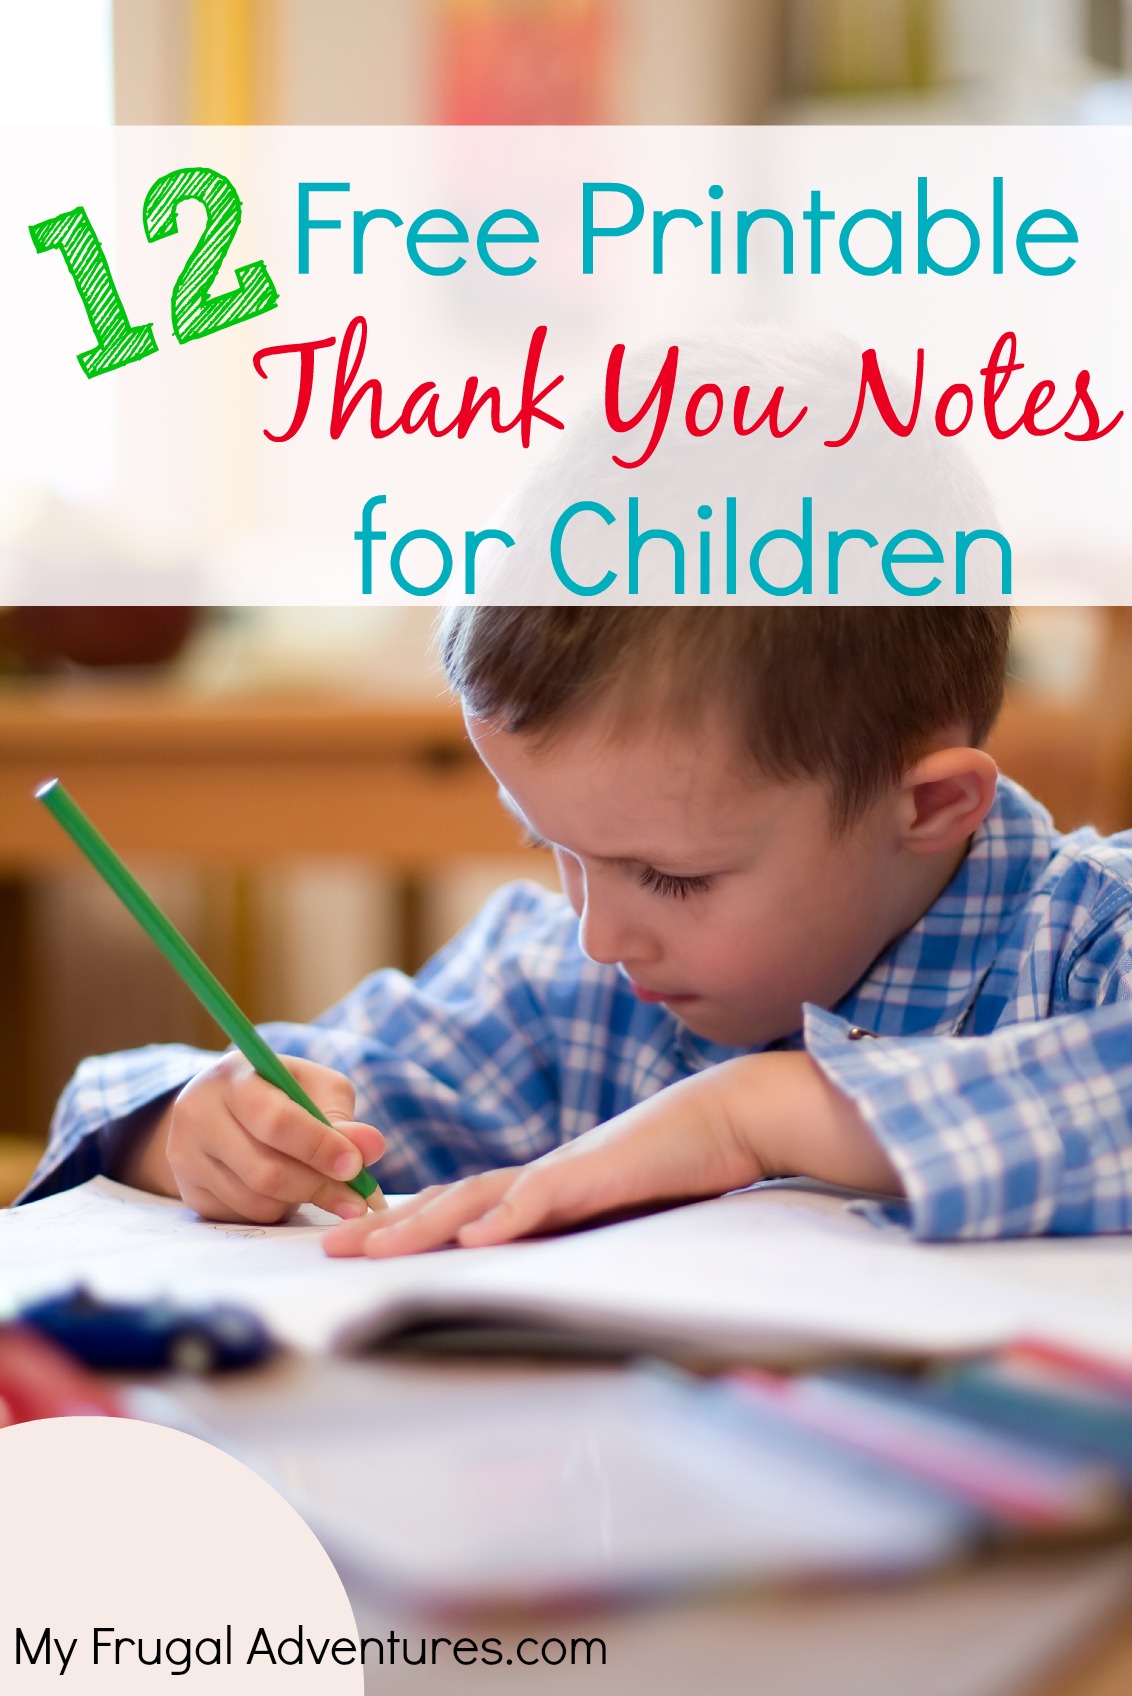 Free Printable Thank You Notes My Frugal Adventures